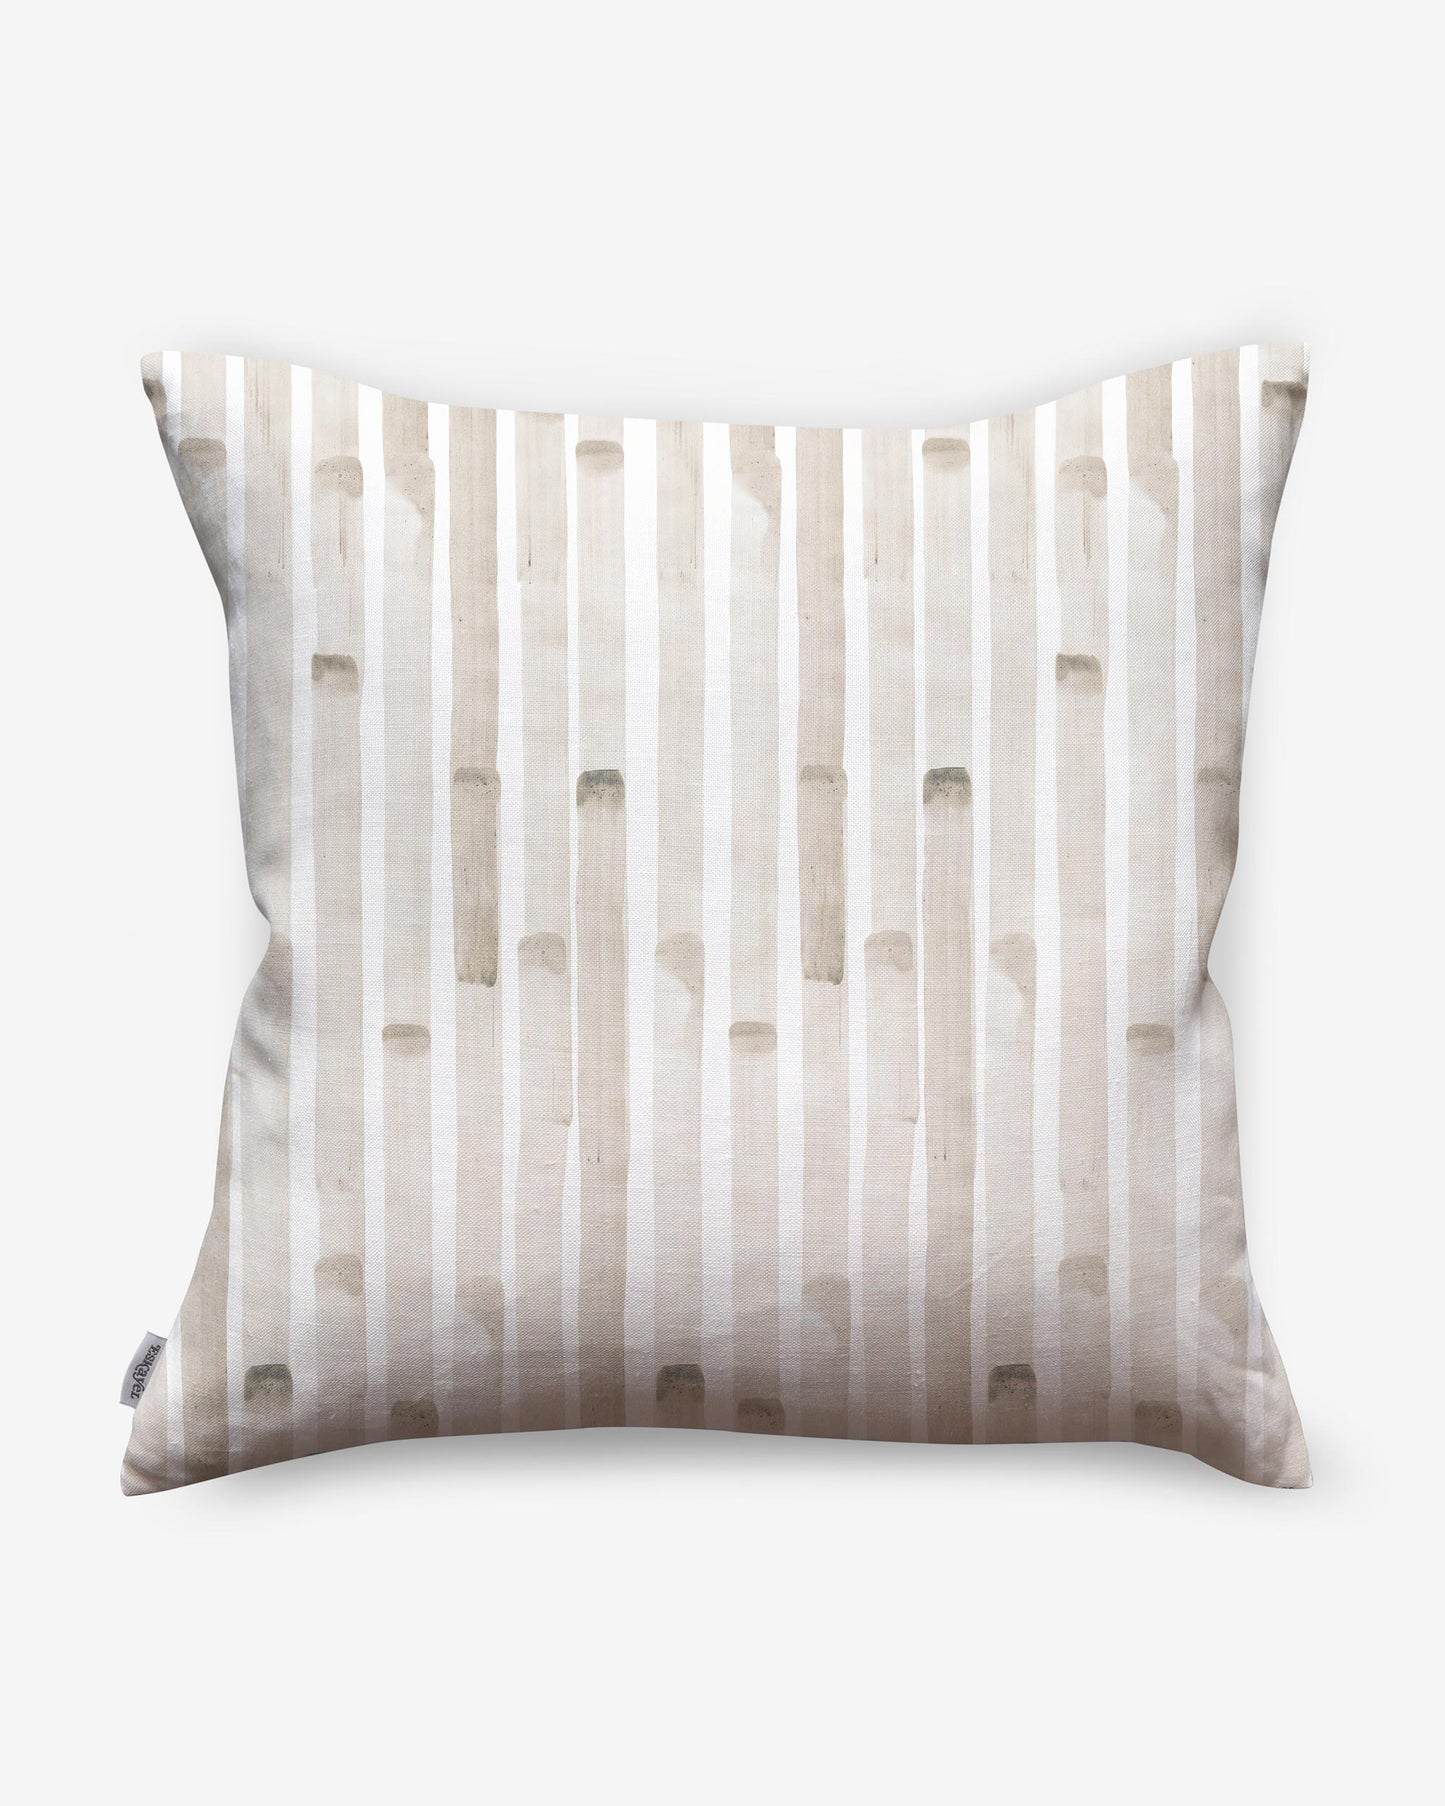 A Bamboo Stripe Pillow Sand with beige and white stripes on it